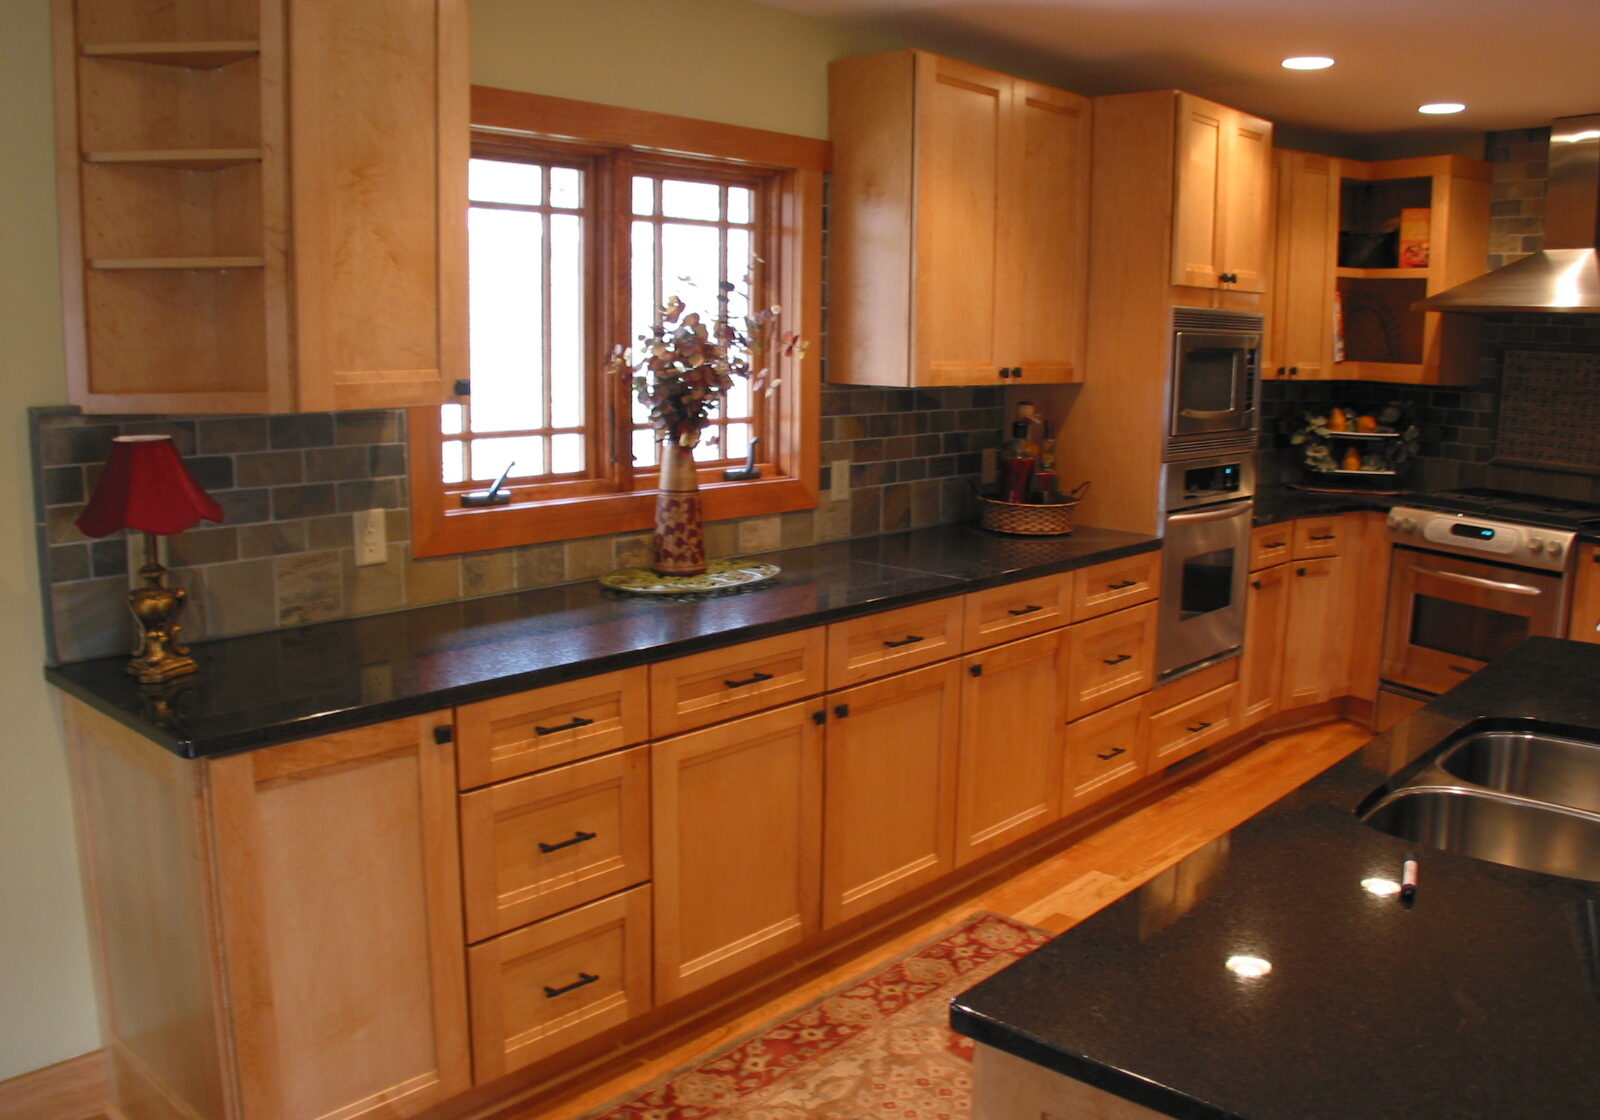 Whole Builders kitchen remodel